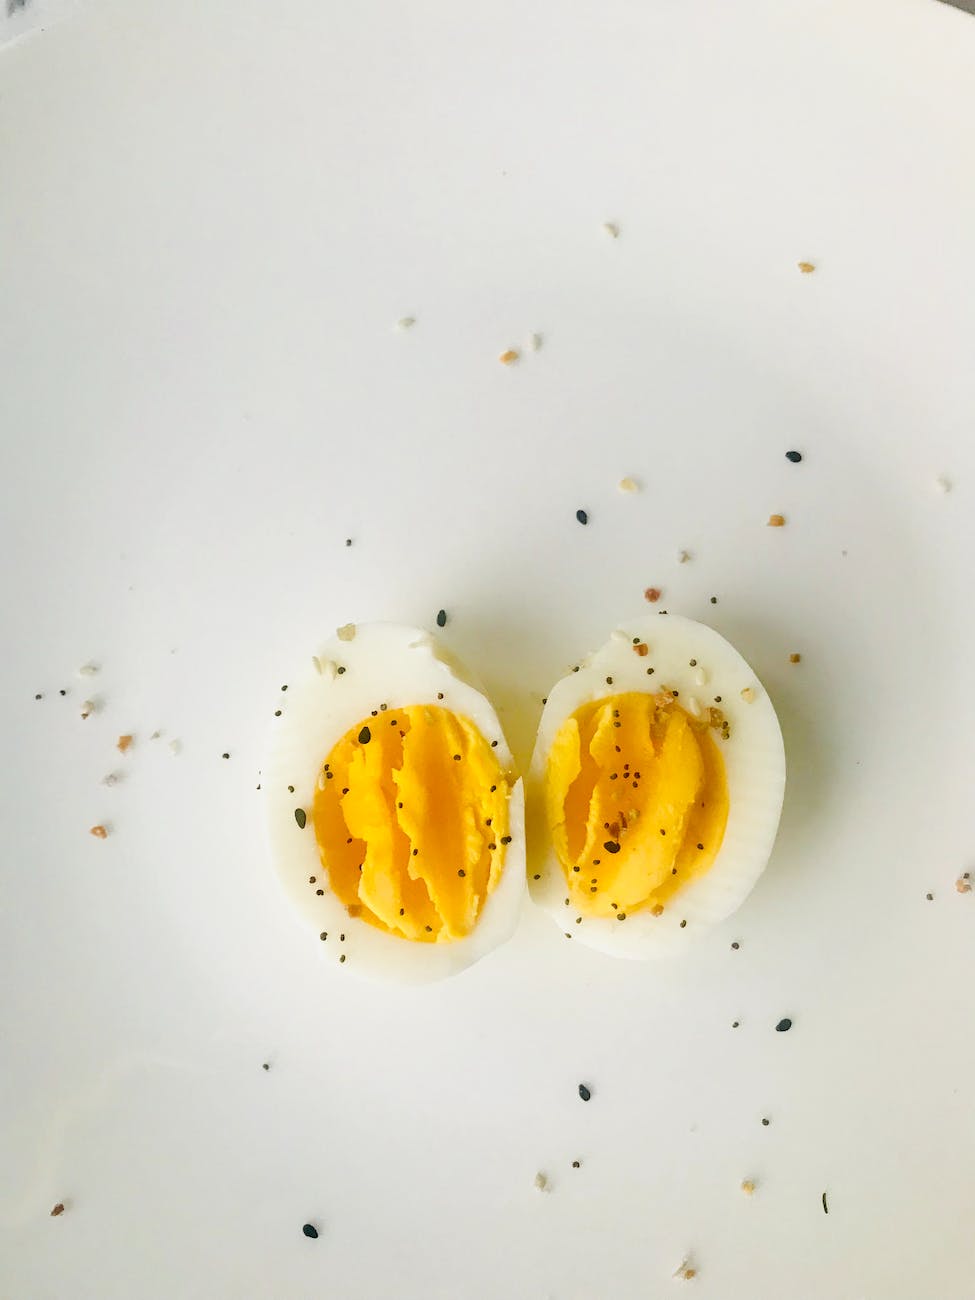 sliced boiled egg on white plate
29 Healthy Snacks Ideas High in Protein: Ultimate Guide + PDF